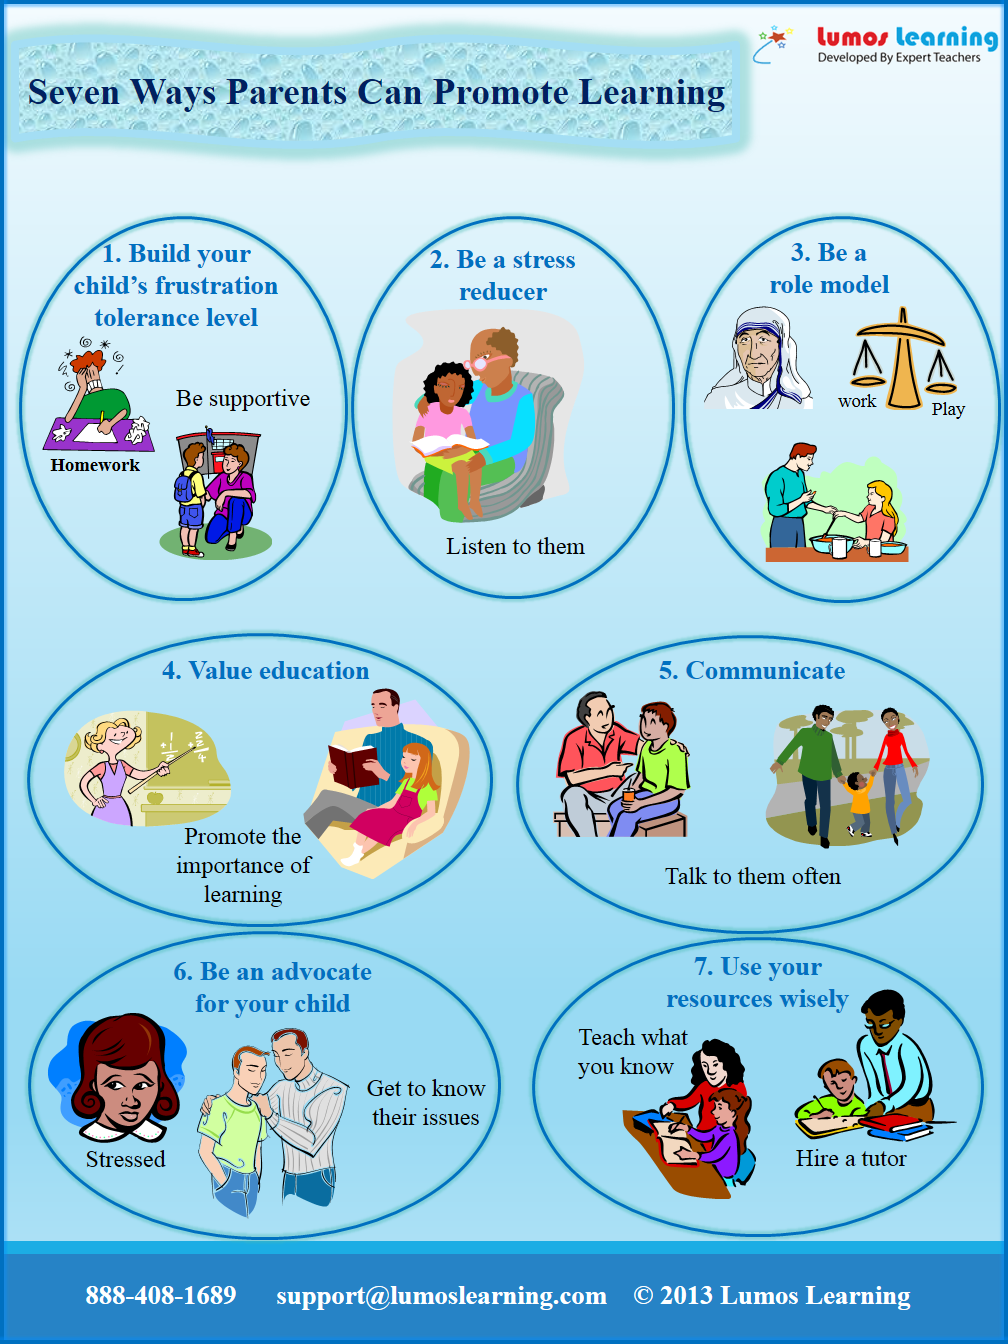 Seven Ways Parents Can Promote Learning - Infographic